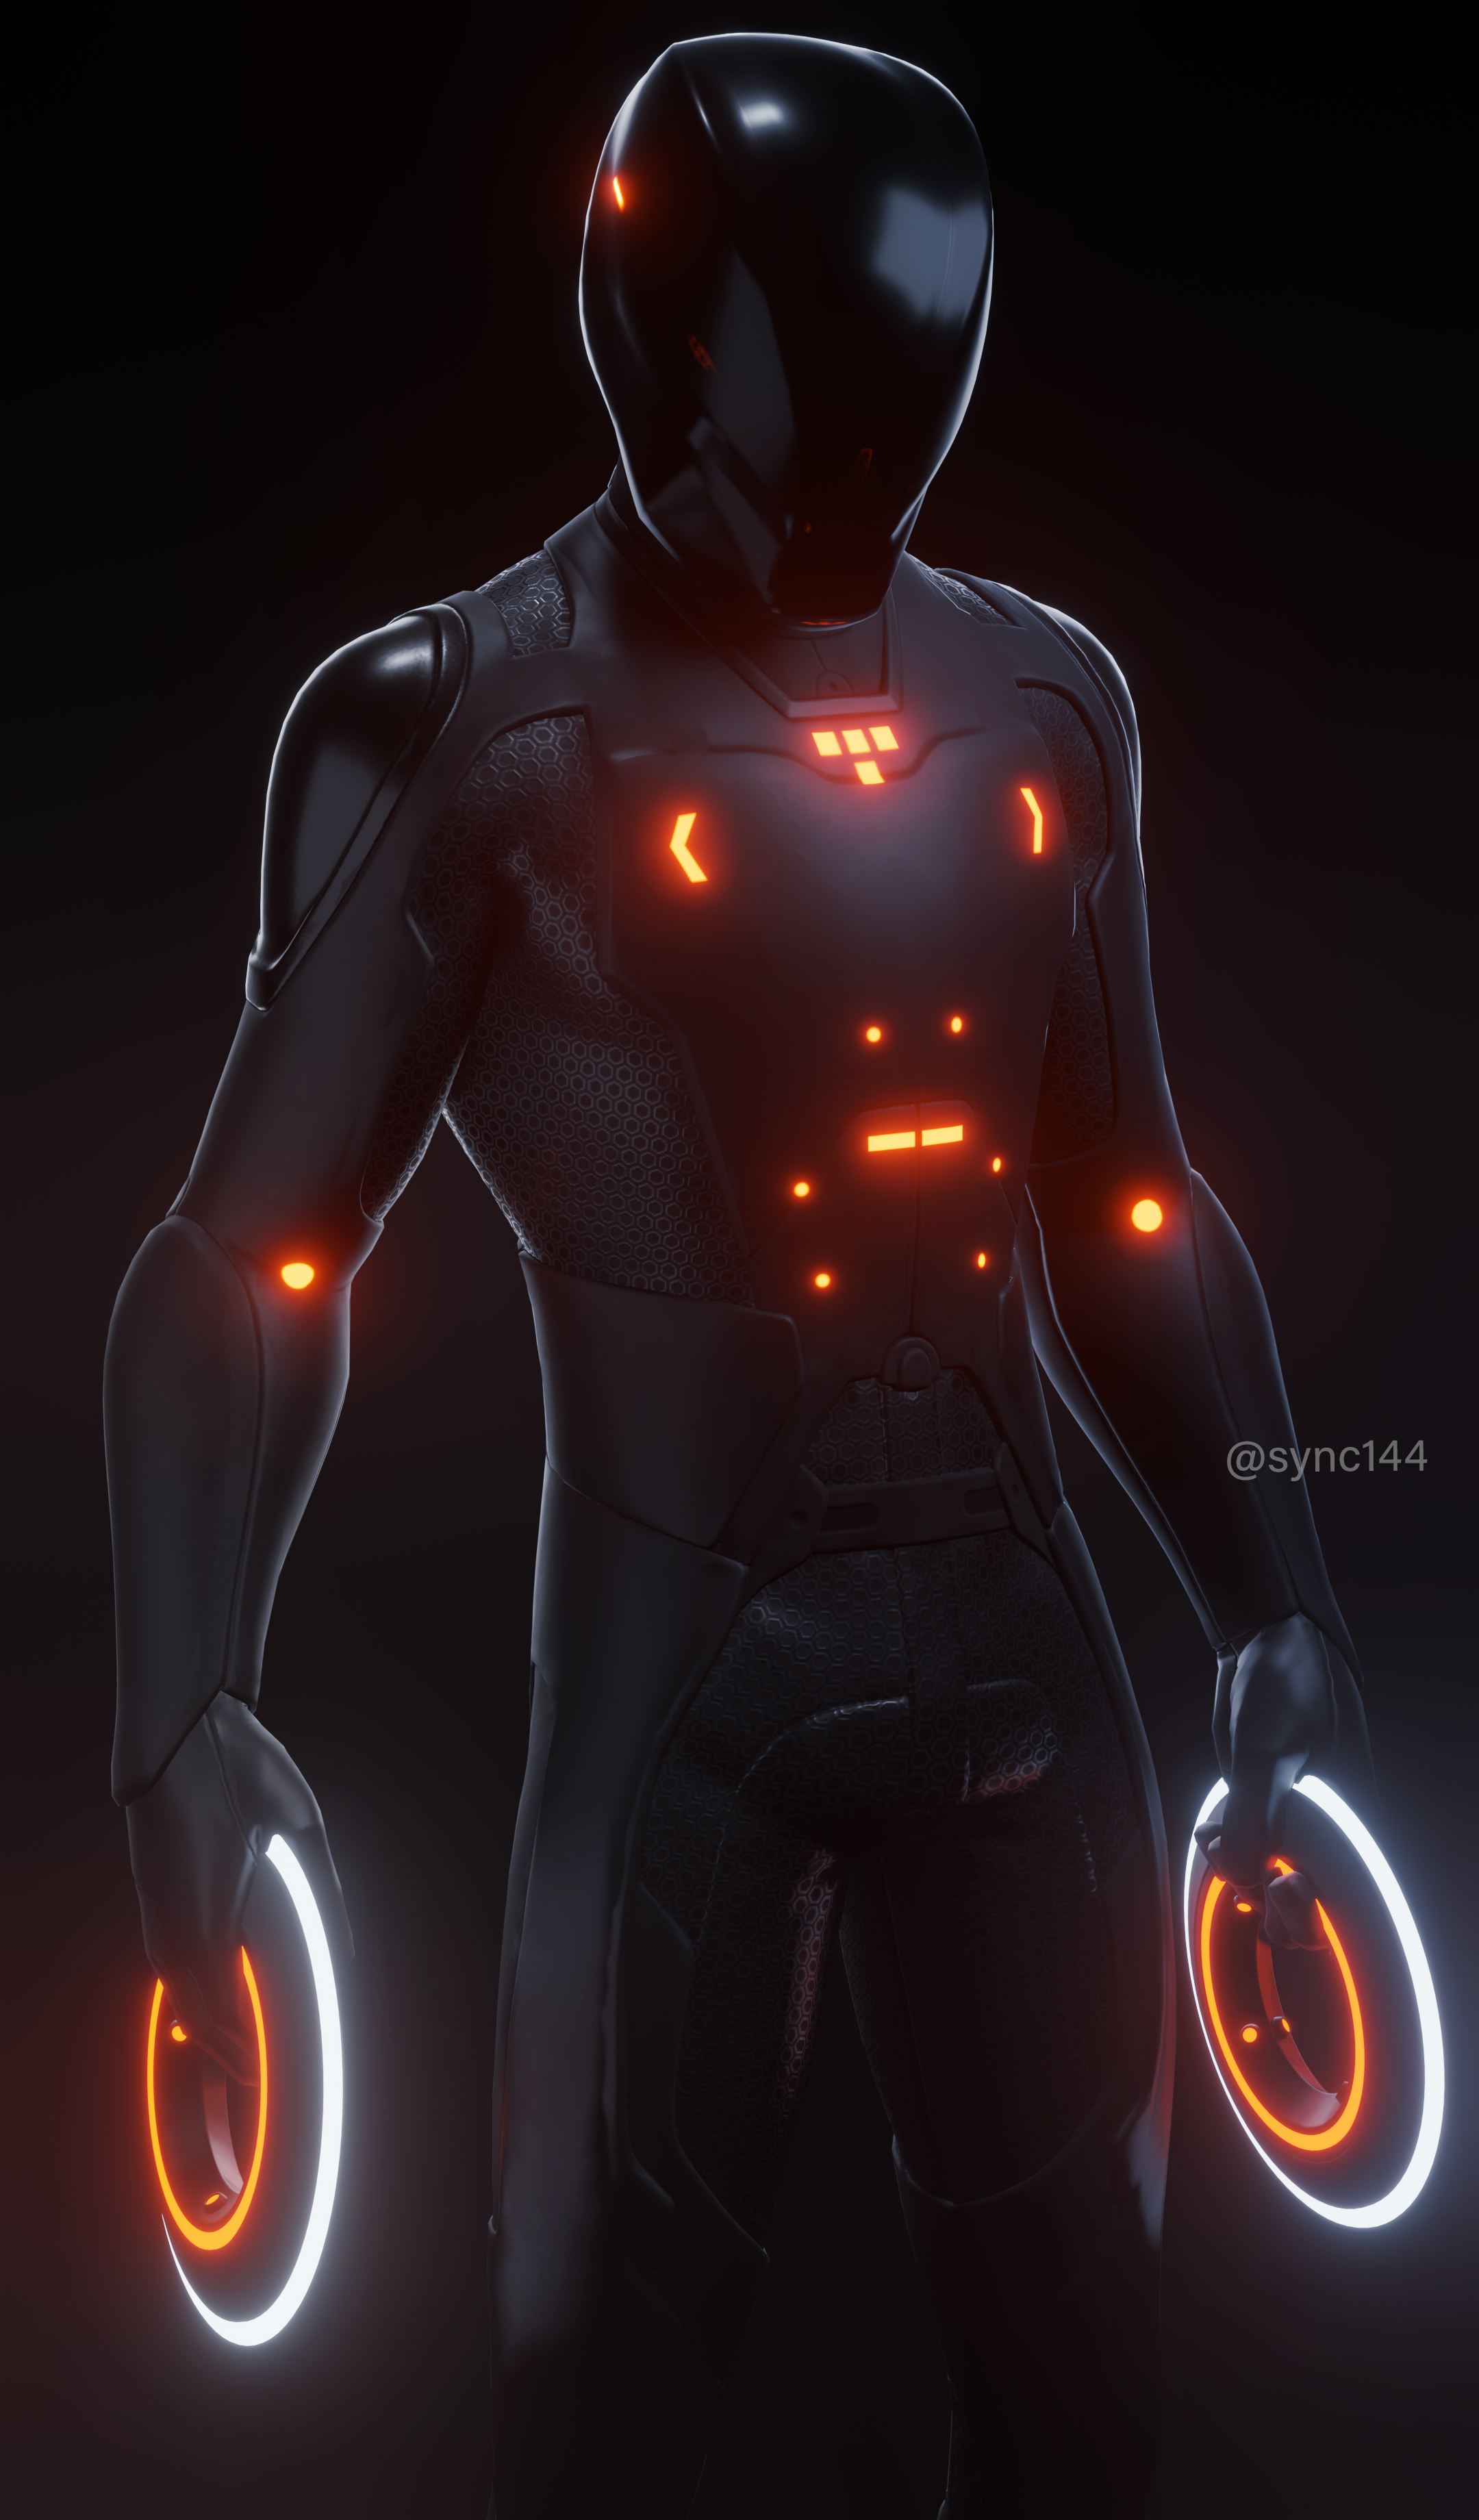 CONCEPT] Epic really missed out on adding Tron characters so